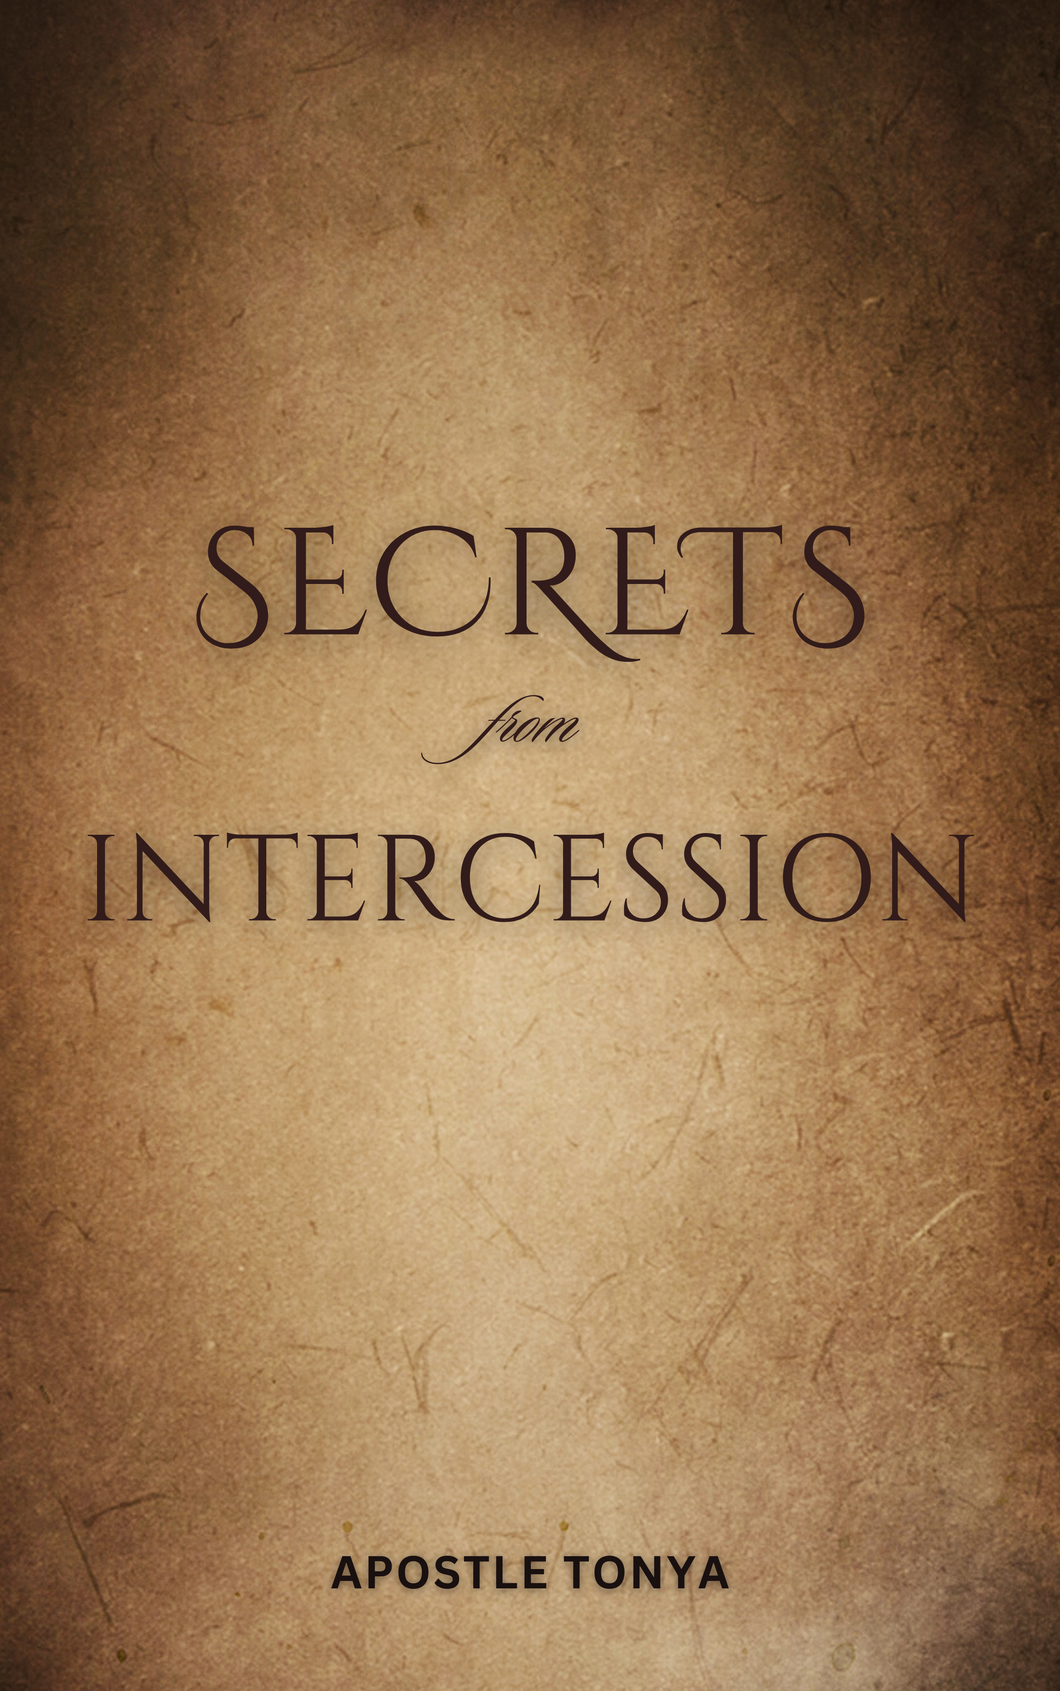 Secrets from Intercession